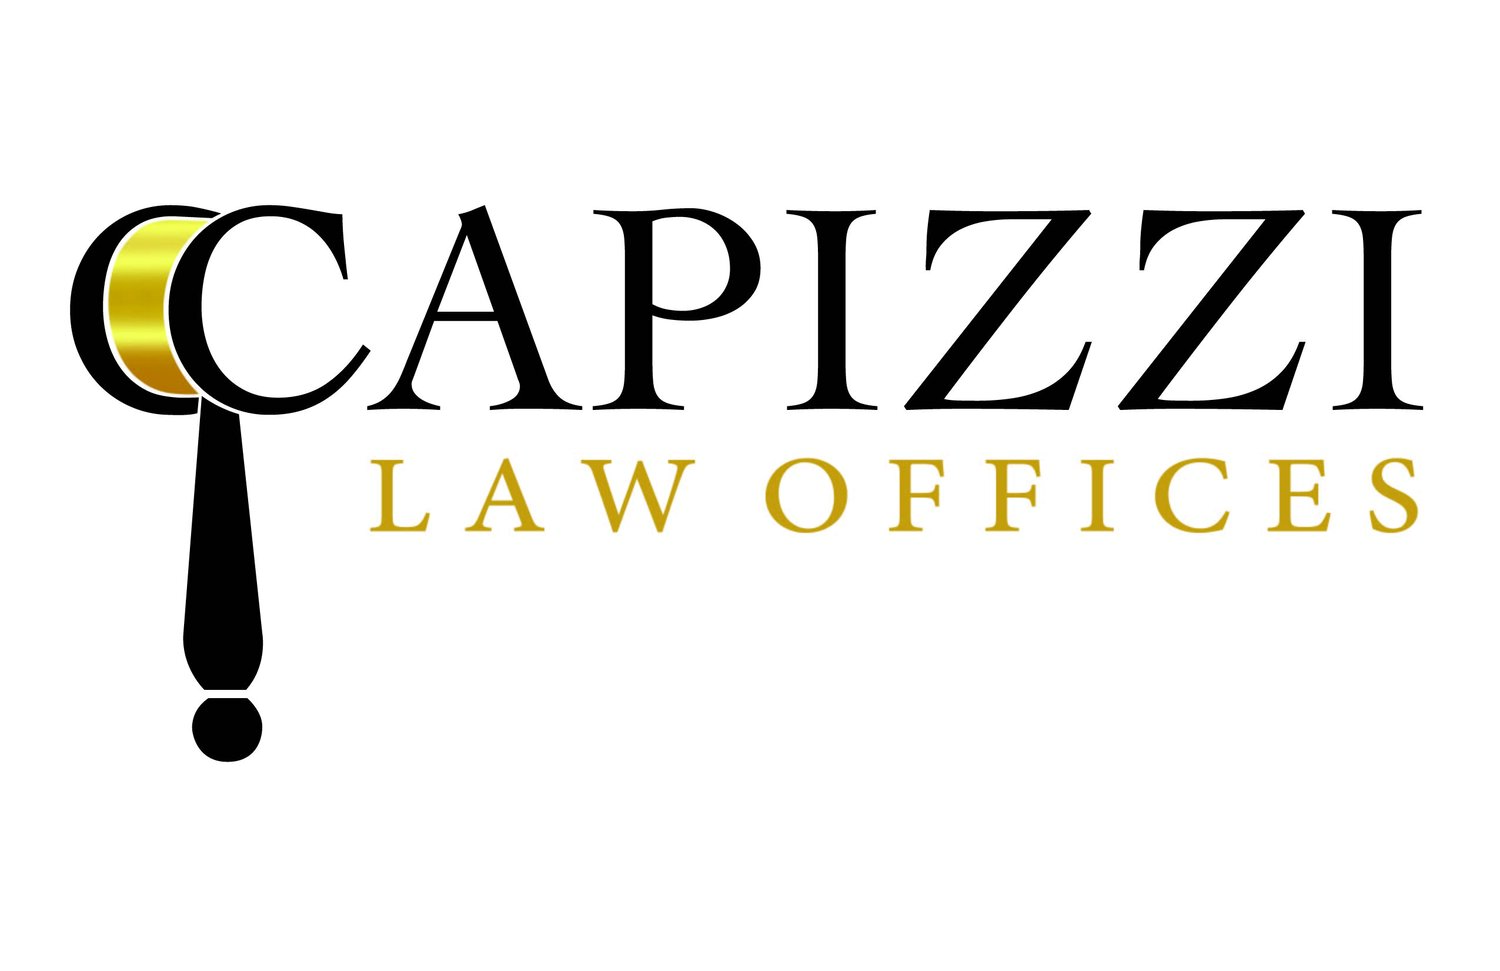 Capizzi Law Offices